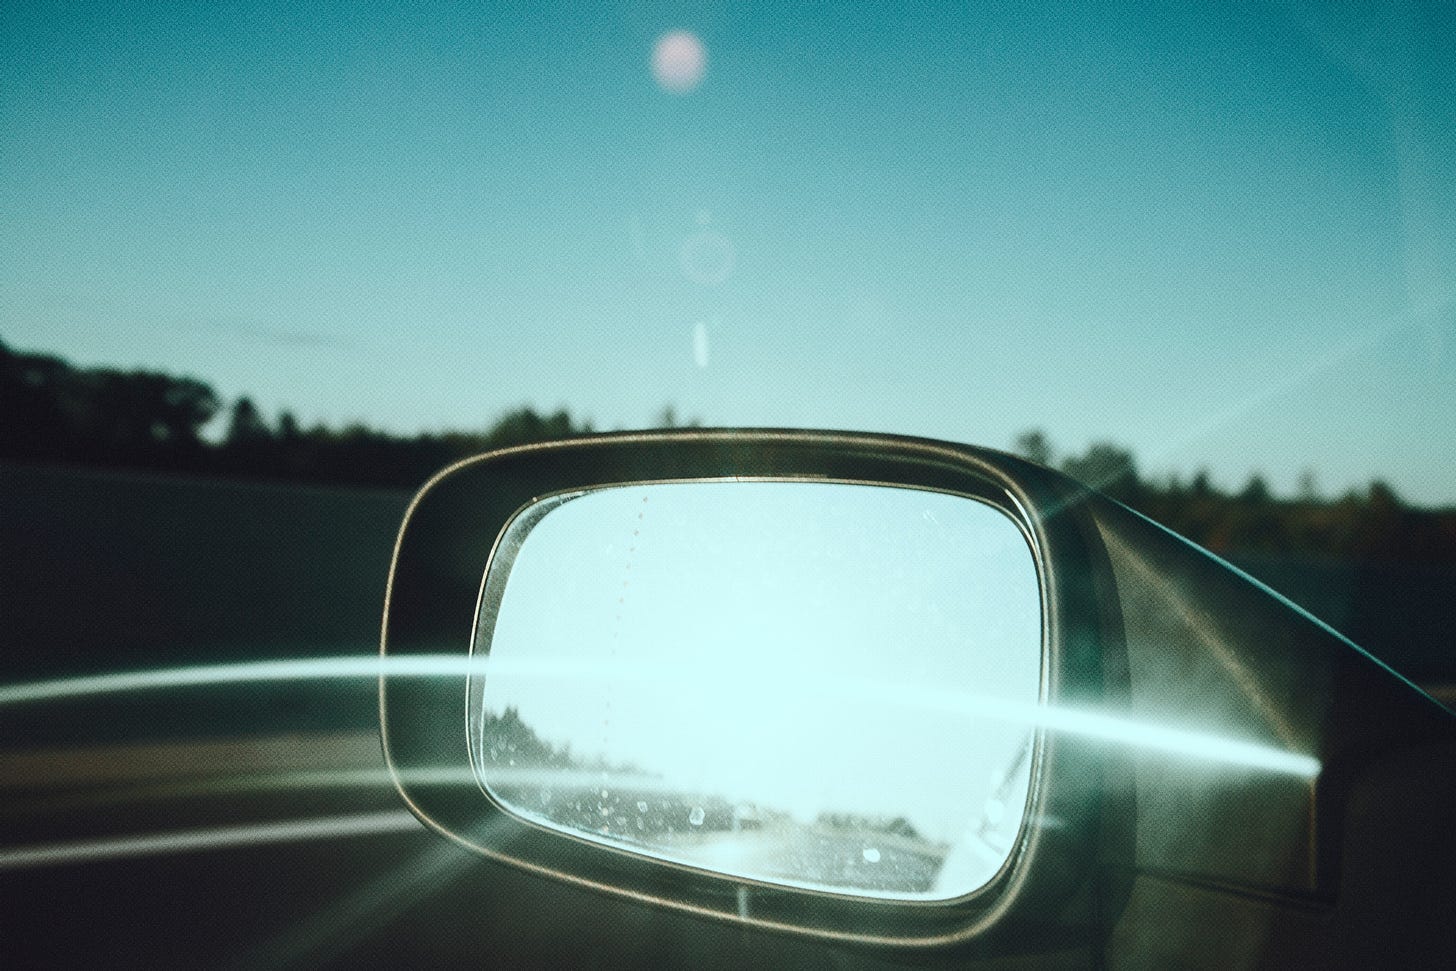 A car's side view mirror with the sun glinting off of it, against a blue sky and an obscured view of a highway.